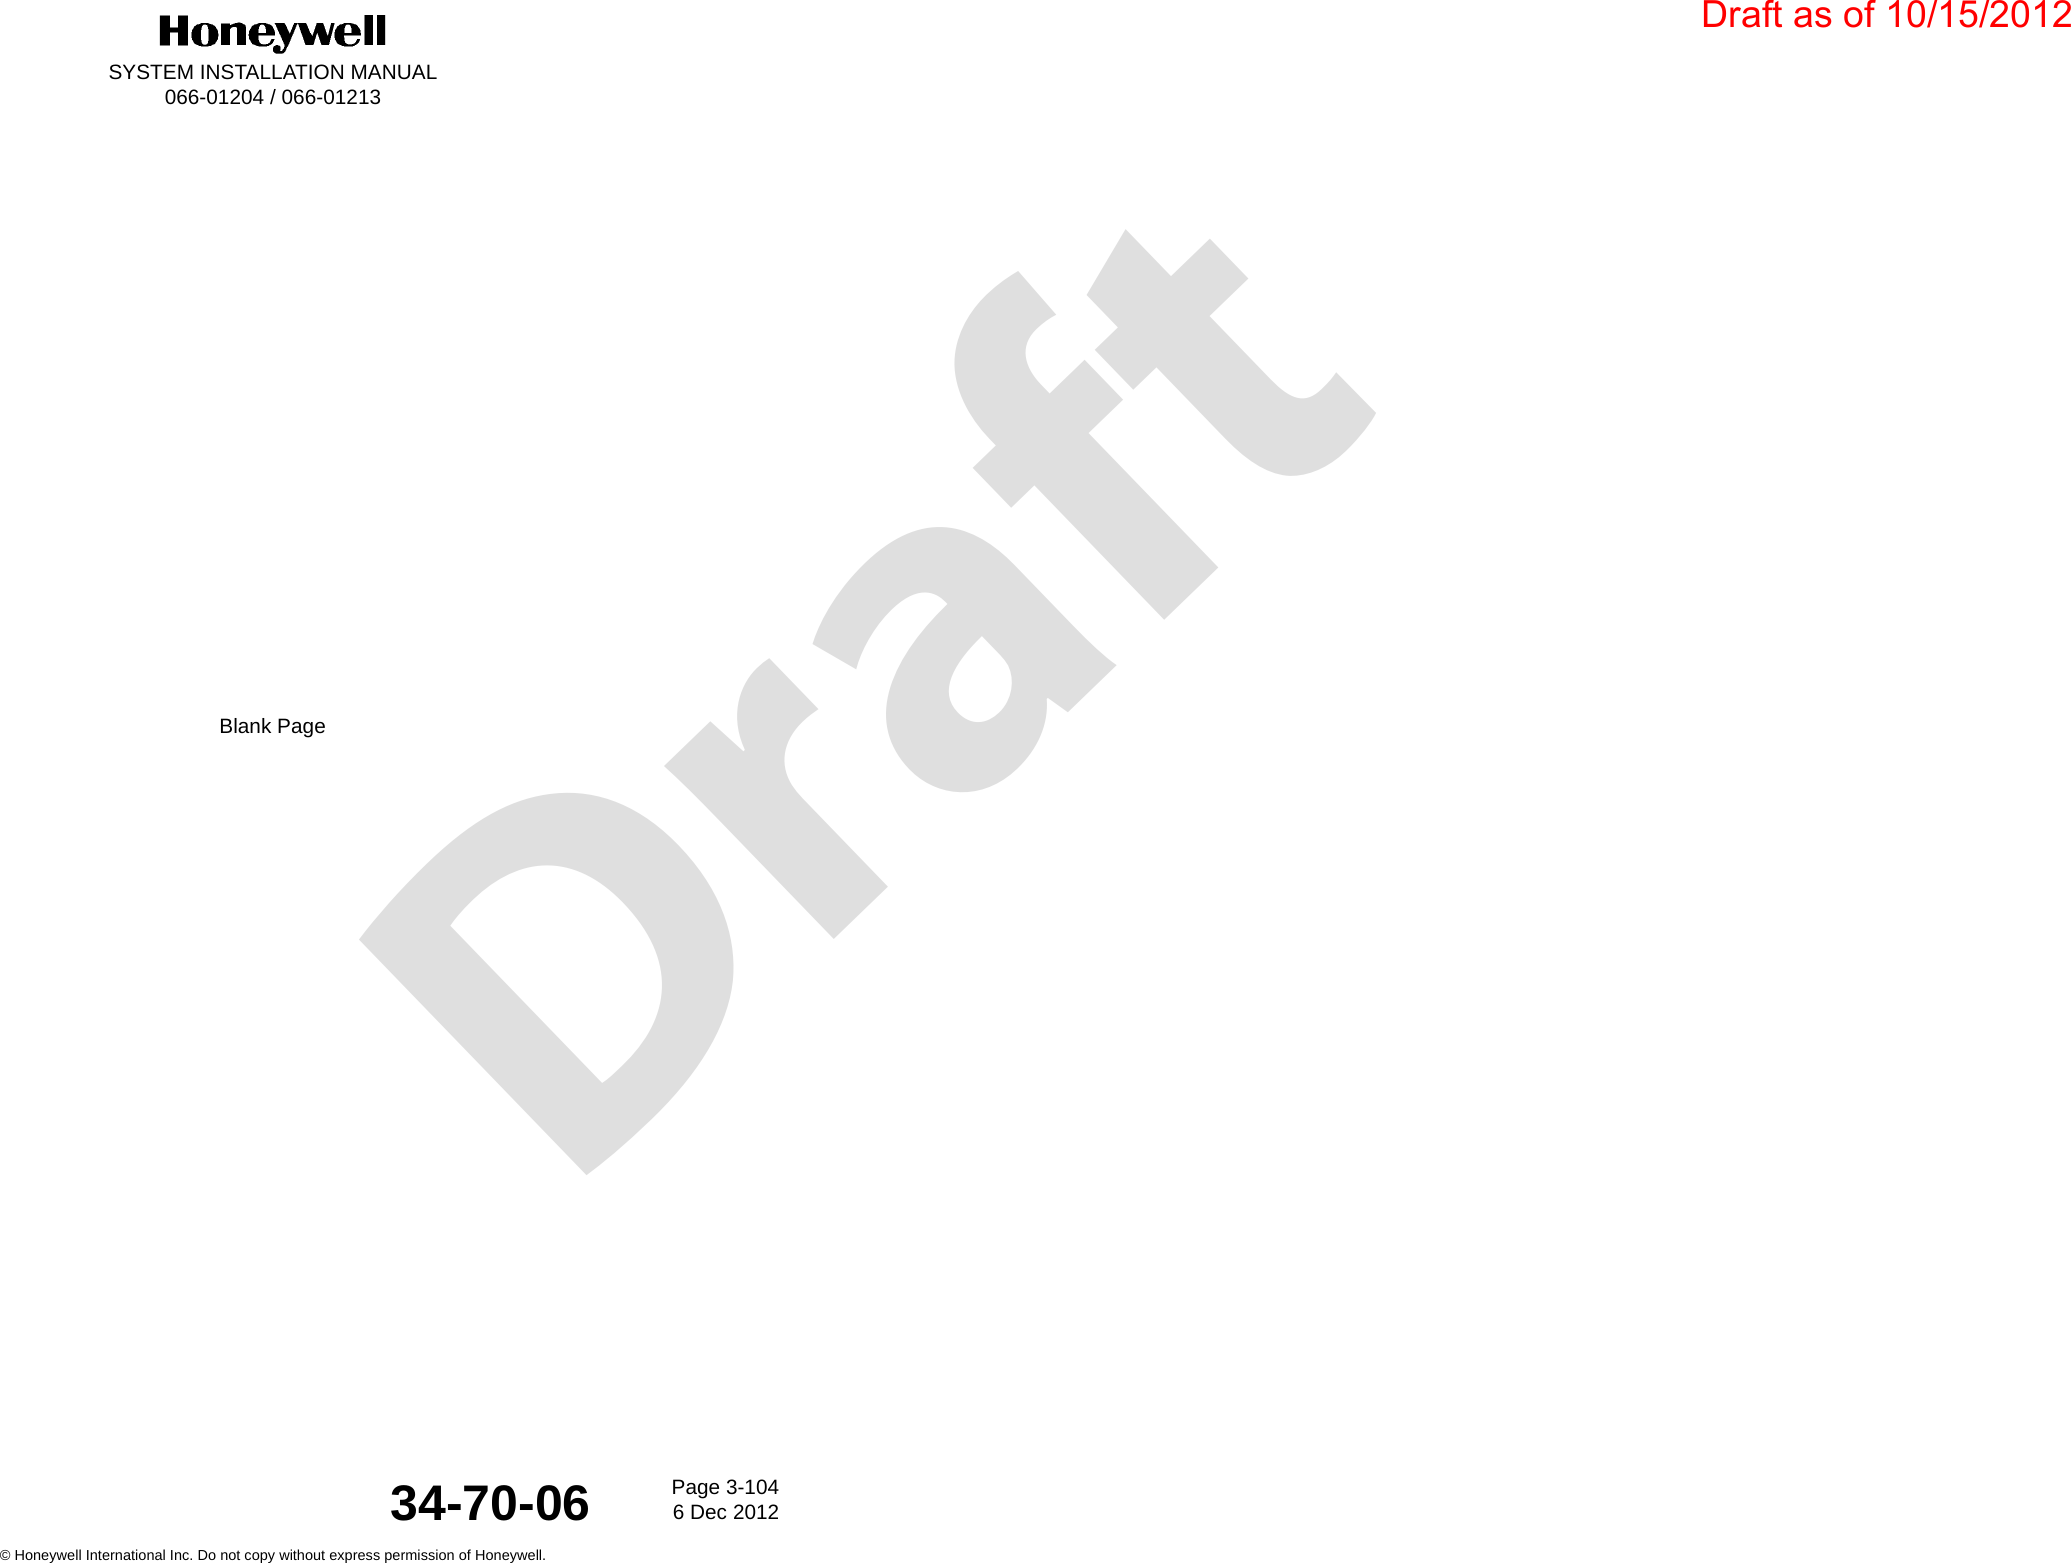 DraftSYSTEM INSTALLATION MANUAL066-01204 / 066-01213Page 3-1046 Dec 2012© Honeywell International Inc. Do not copy without express permission of Honeywell.34-70-06Blank PageDraft as of 10/15/2012